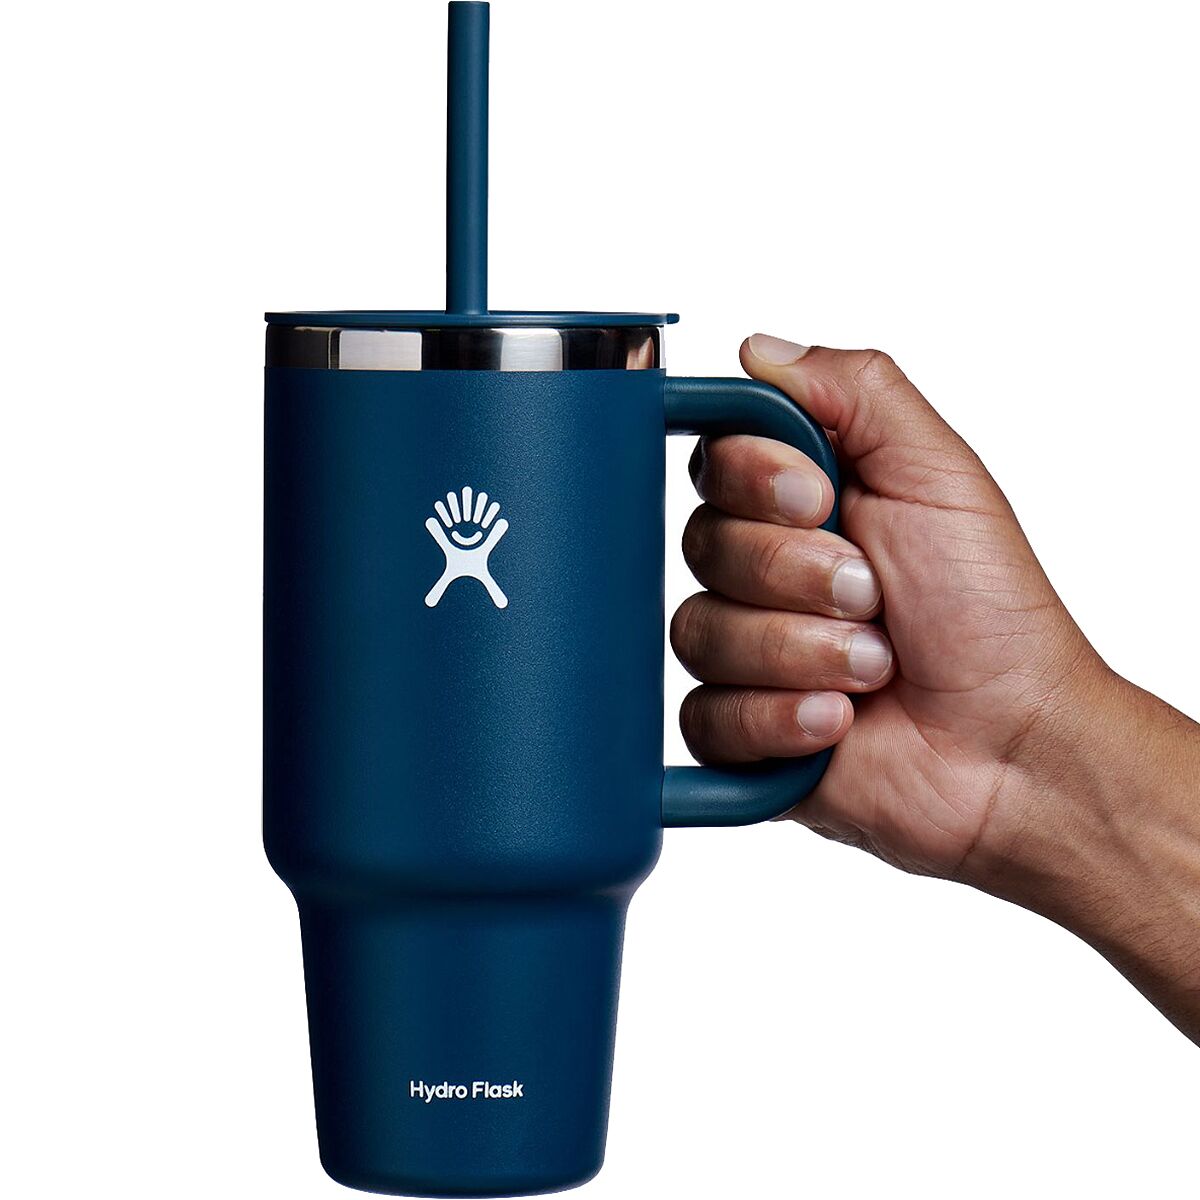 Hydro Flask® 32oz Travel Tumbler - Stay Hydrated Anywhere!